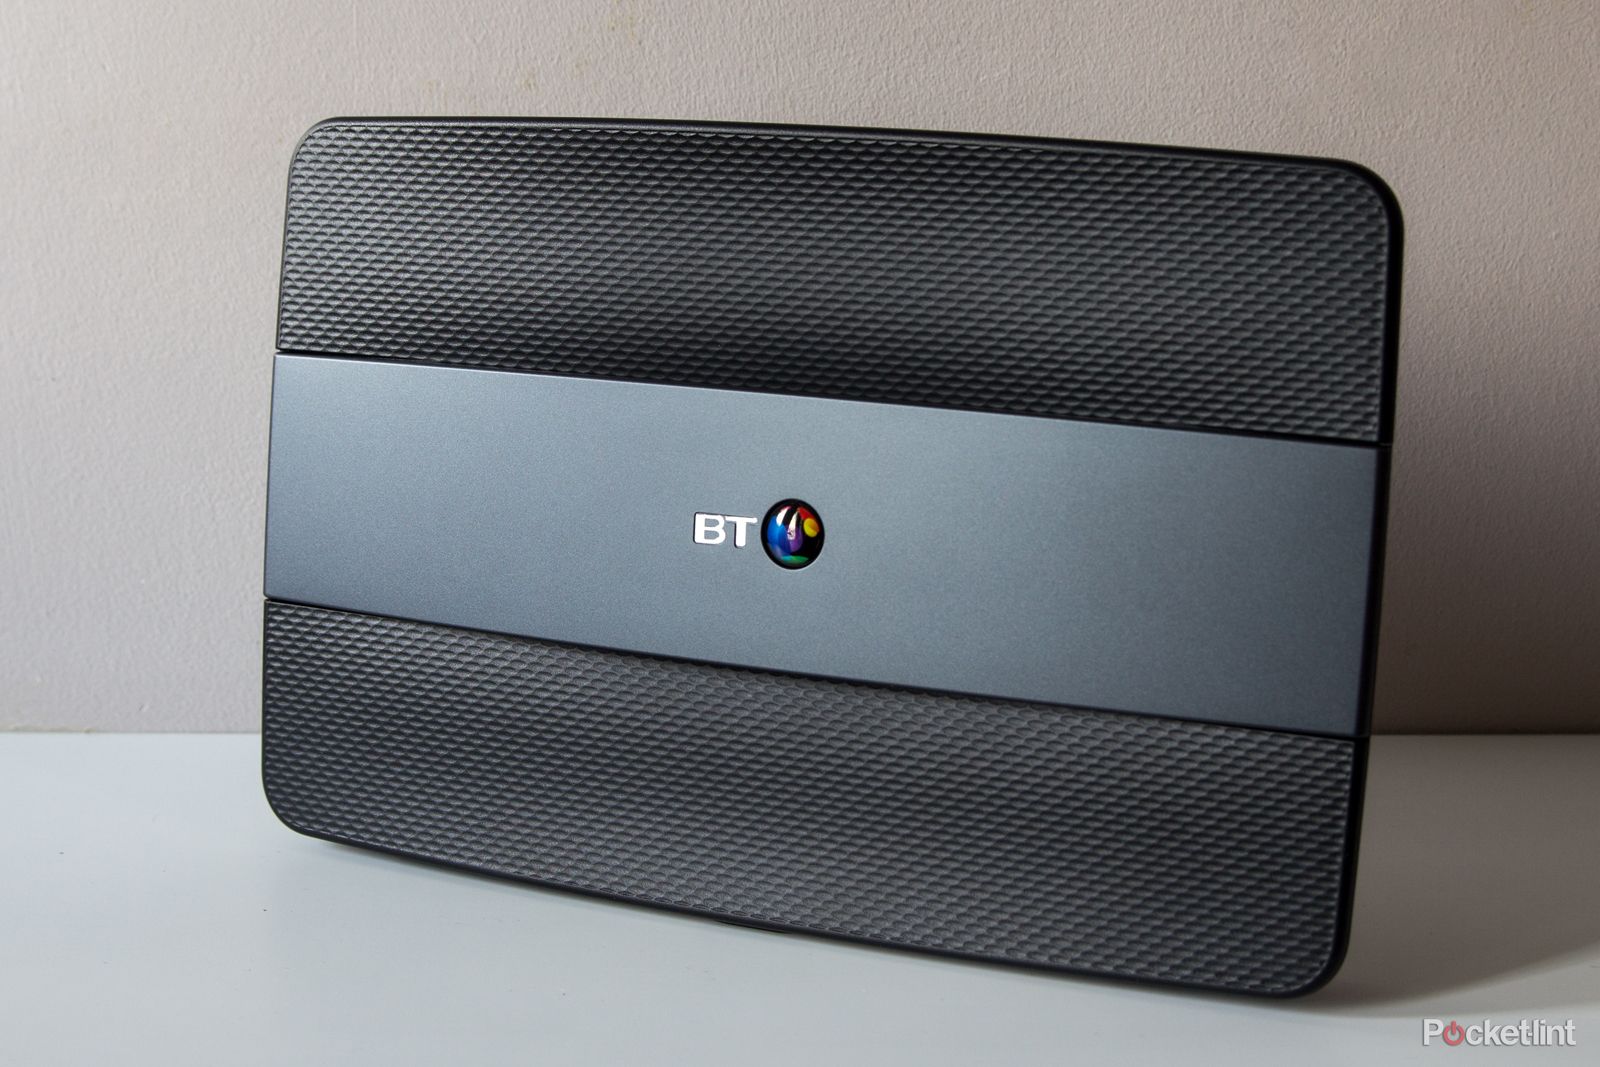 bt smart hub bt s new hub is faster smarter and ready for the future image 1